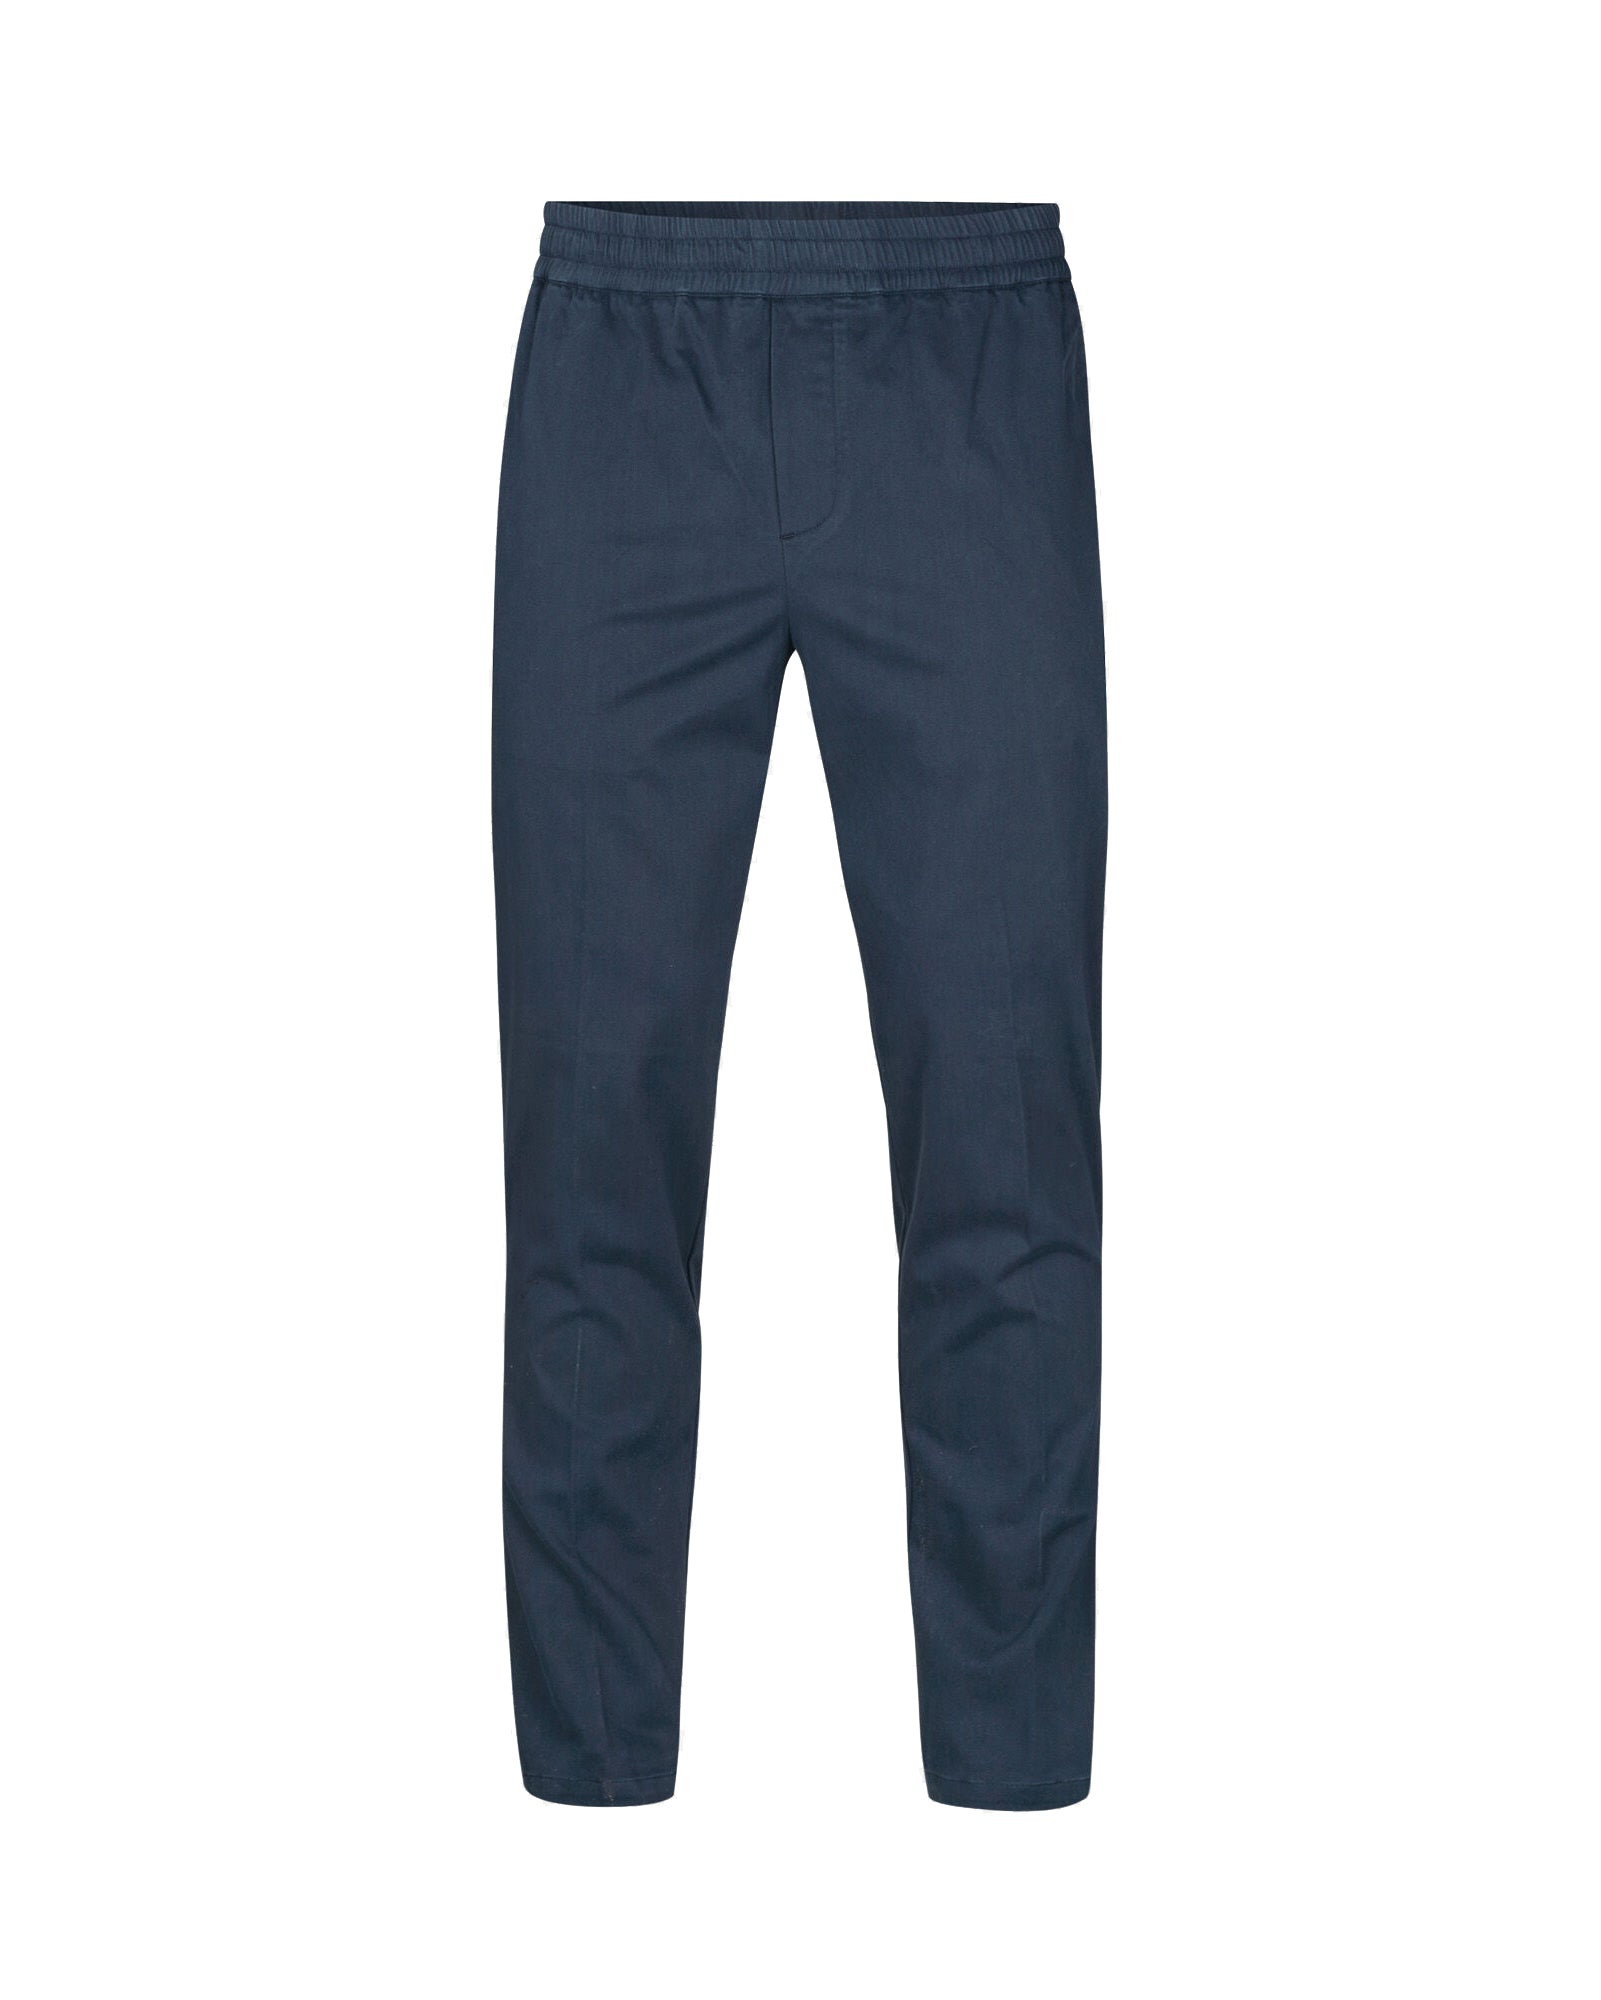 Smithy trousers 10821 - Salute